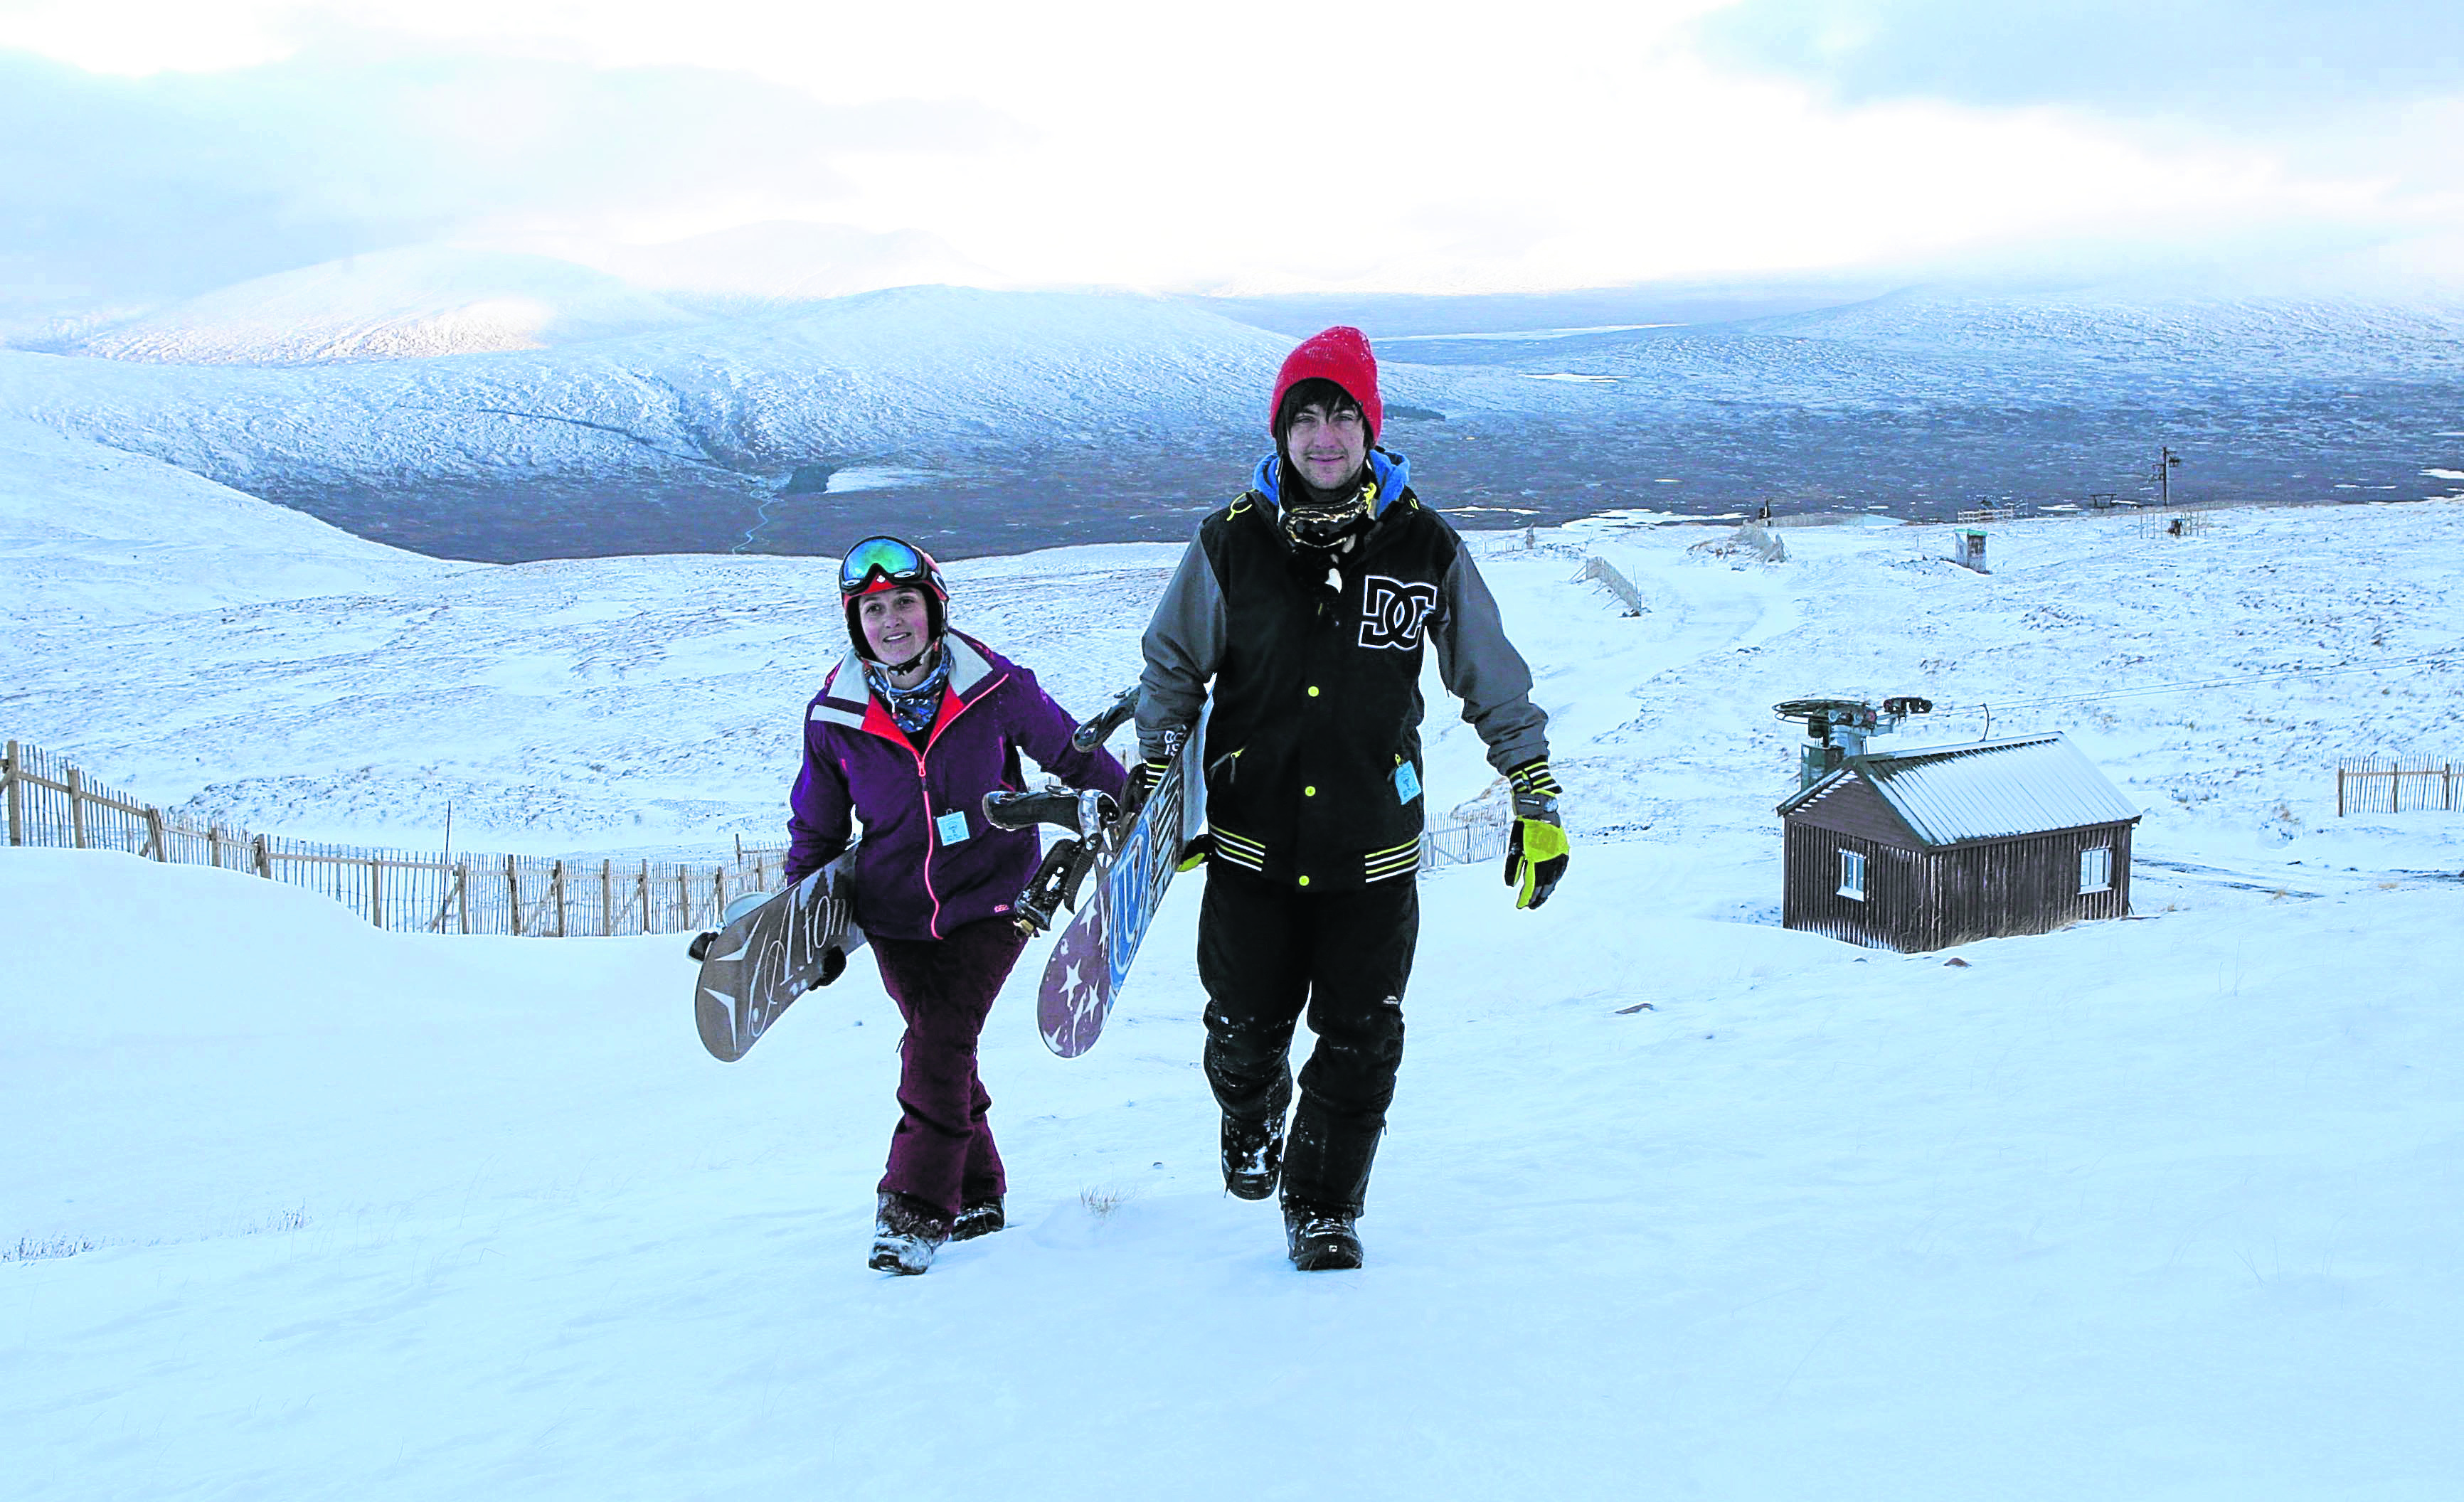 L- R Debbie Rooke and David Crammond who were among the first people to snow board at Glencoe mountain resort this winter.